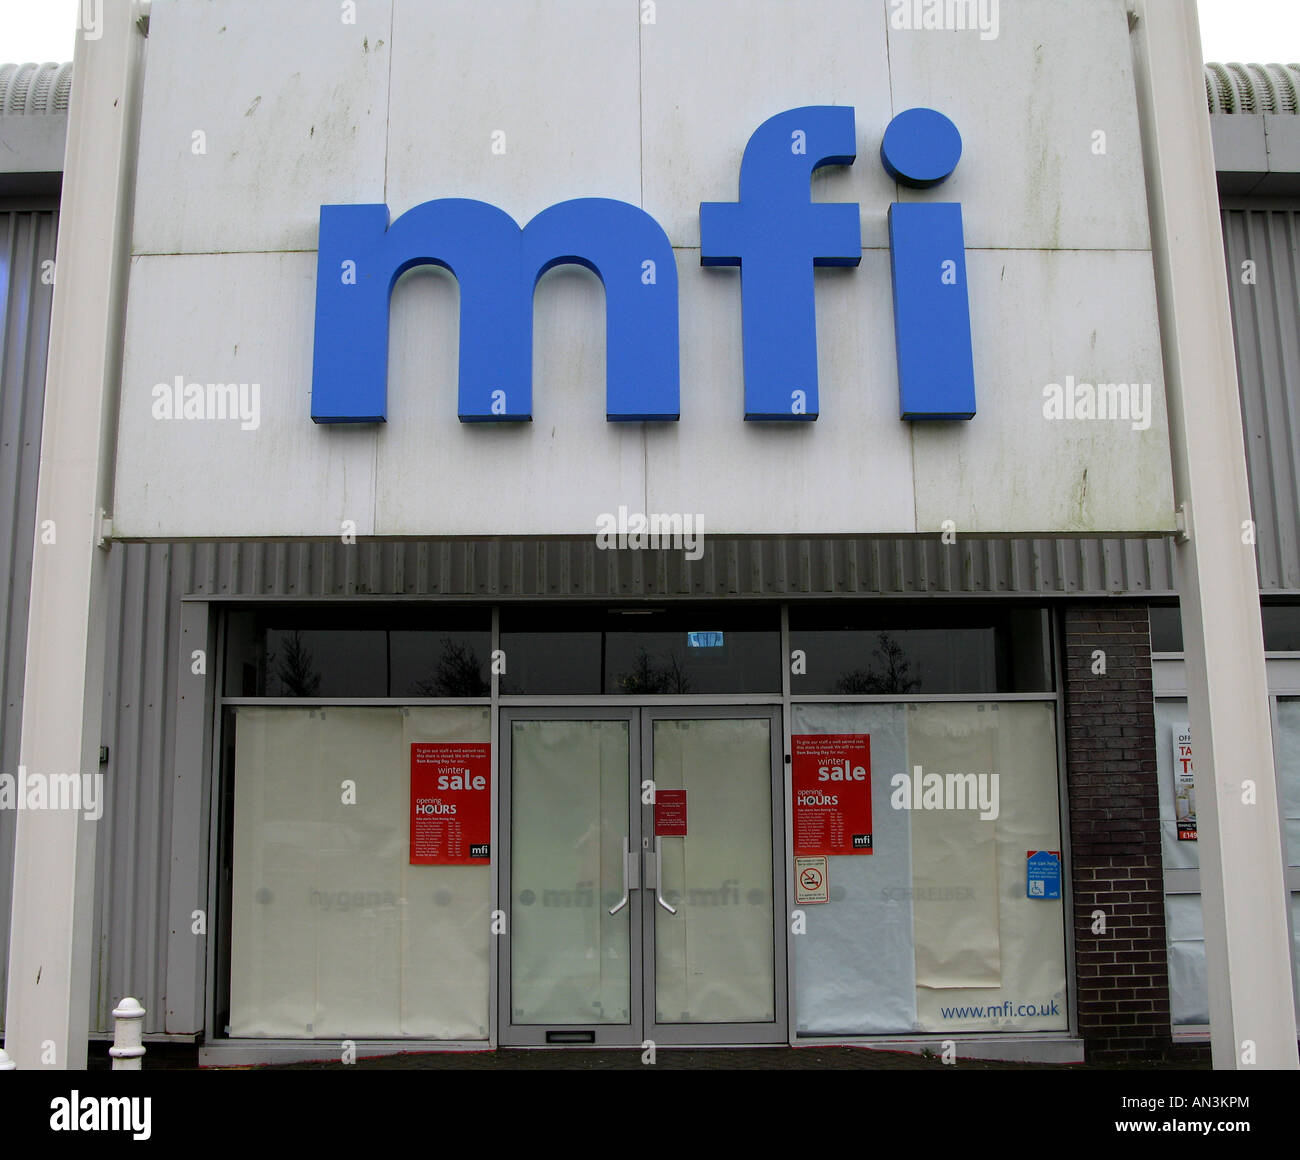 A closed MFI store with the windows boarded up in Merthyr Tydfil Stock Photo